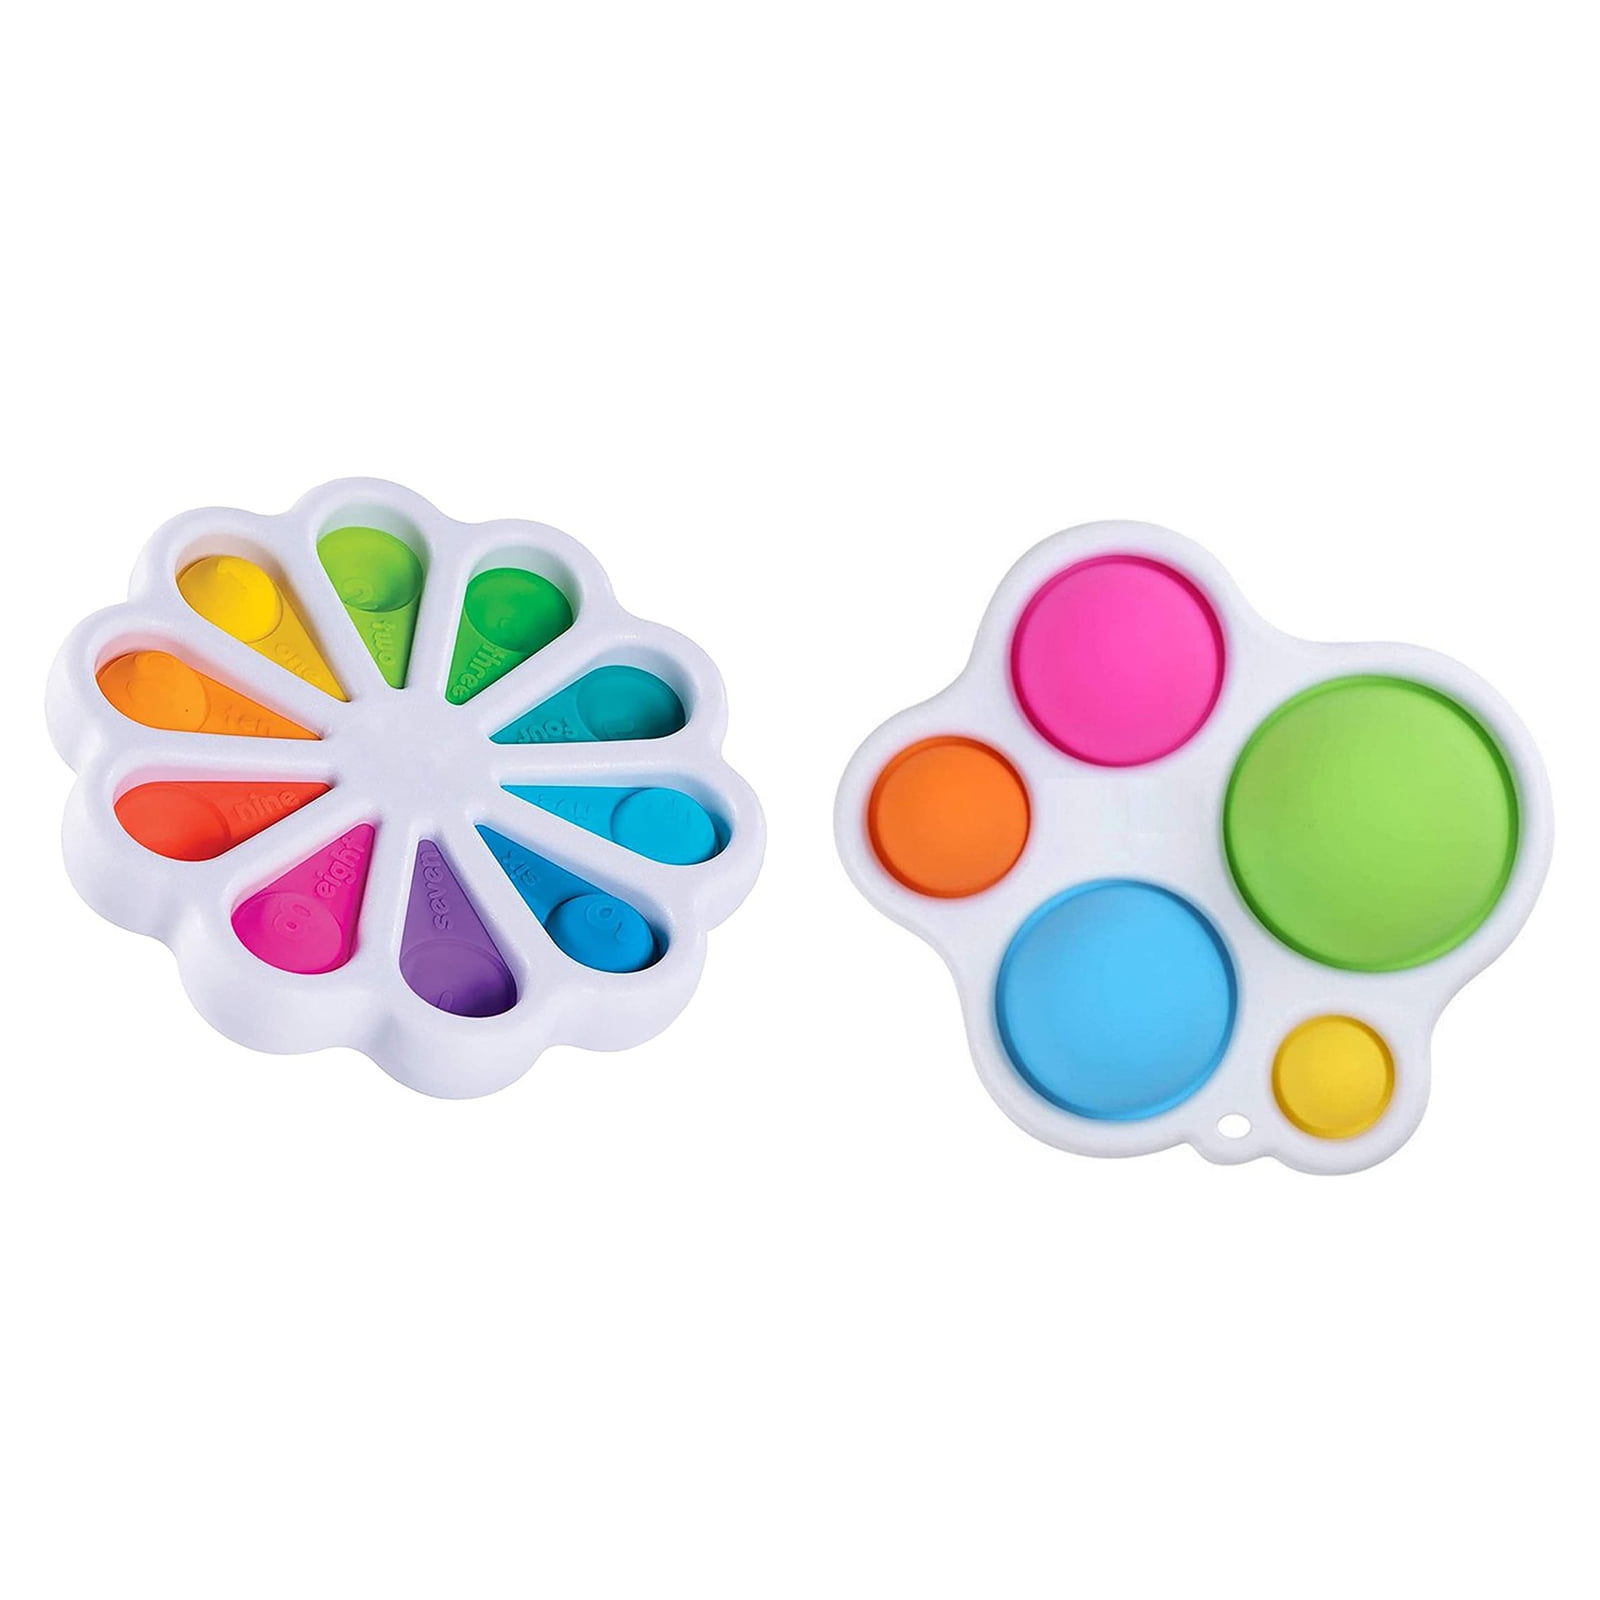 Mini pop its Fidgets for Anxiety Toy with Buckle Ring Stress Relief and Anti-Anxiety Puzzle Fun Haoshenghuo 2 PCS Fidget Toys Simpl dimpl Fidget Popper for Adults and Kids